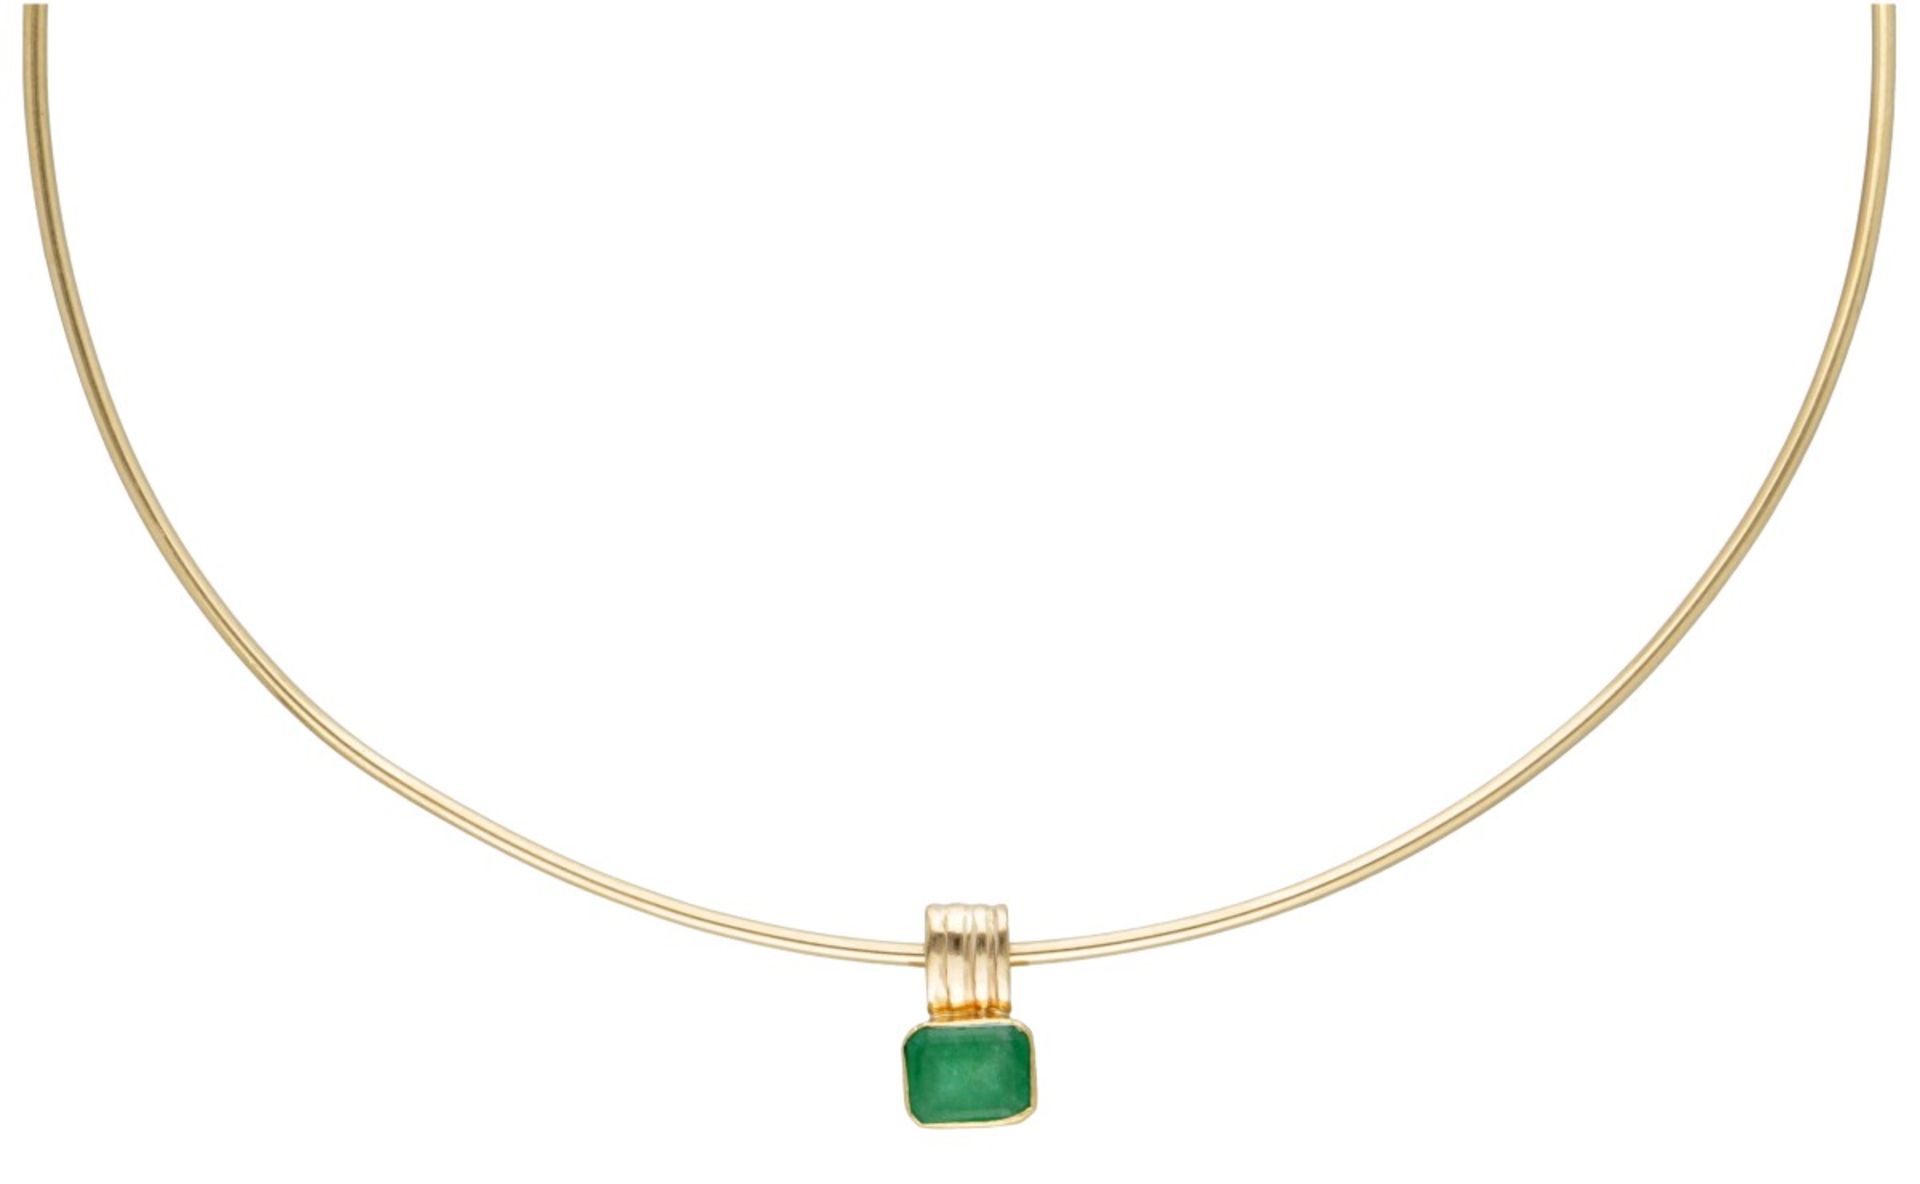 18K. Yellow gold collar necklace provided with a 14K. pendant set with approx. 2.03 ct. aventurine.